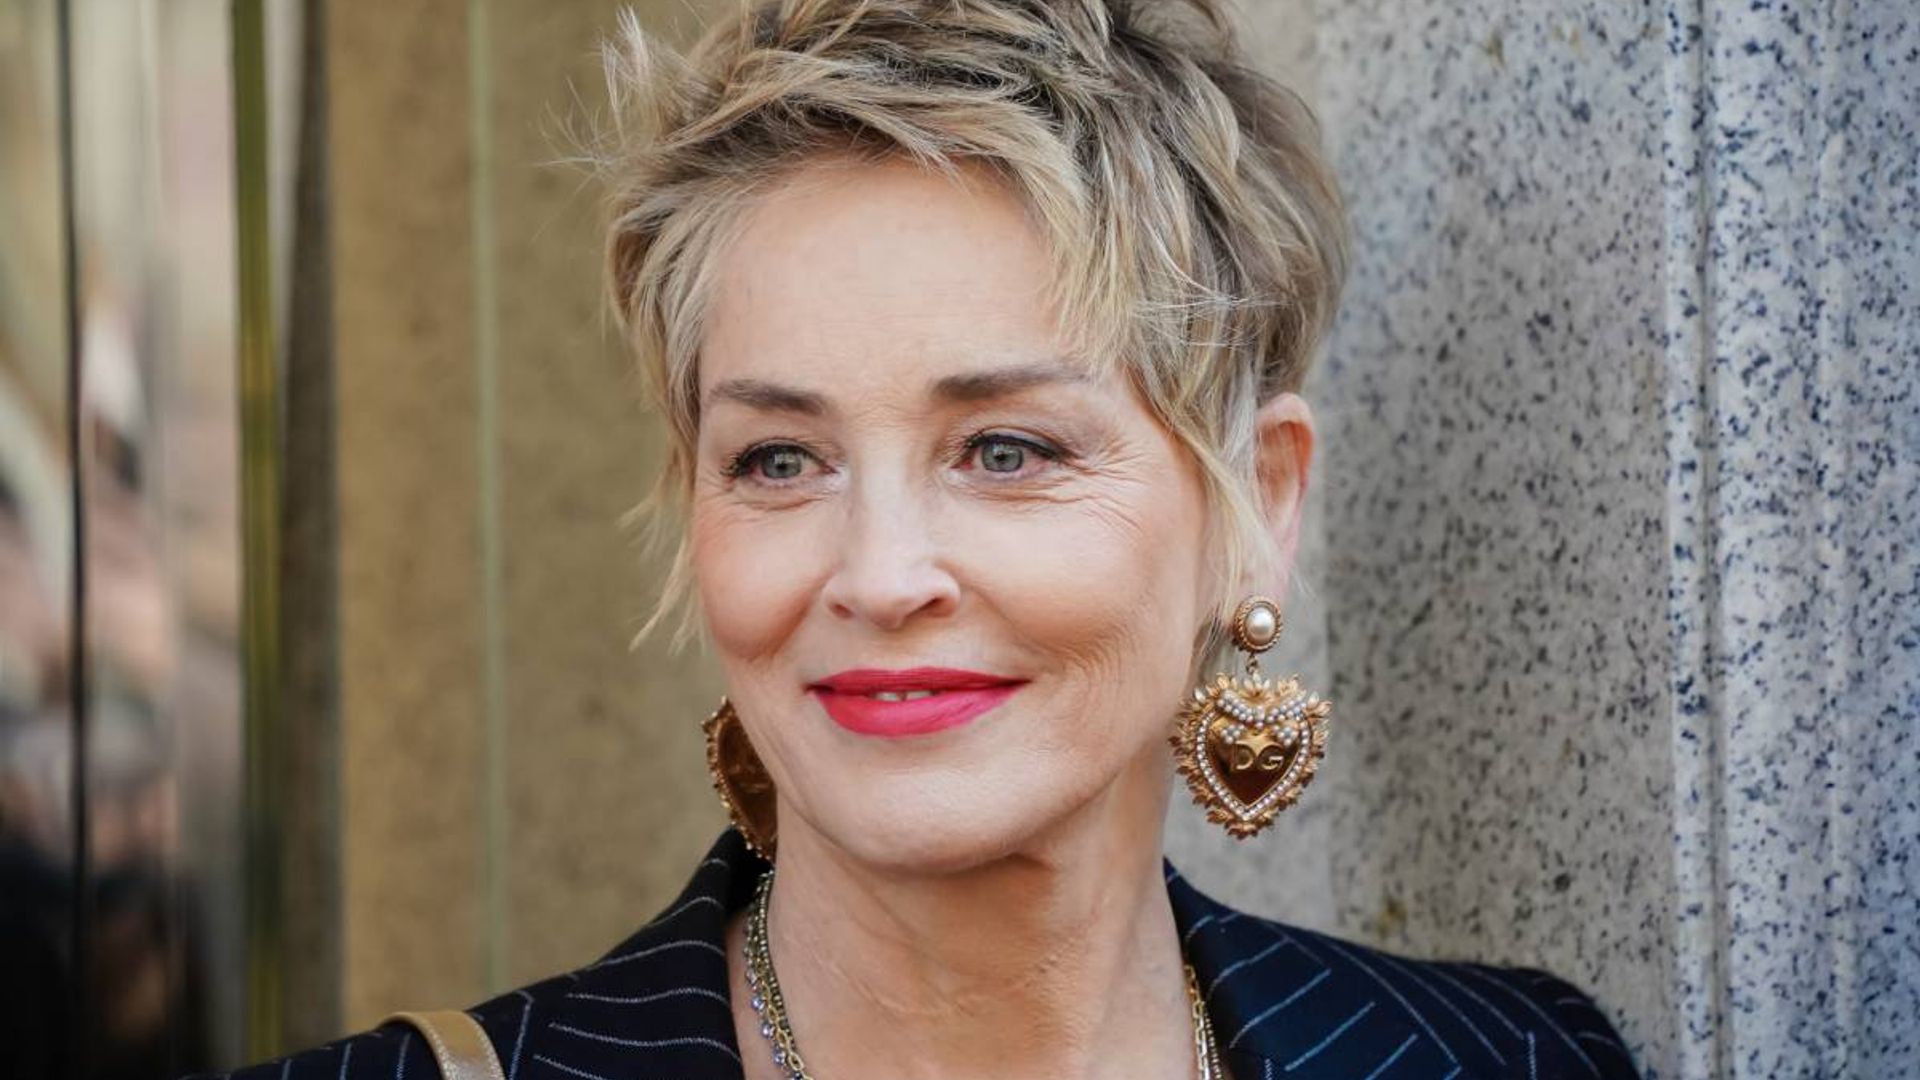 Sharon Stone shares uplifting health update on her mom as fans send their support